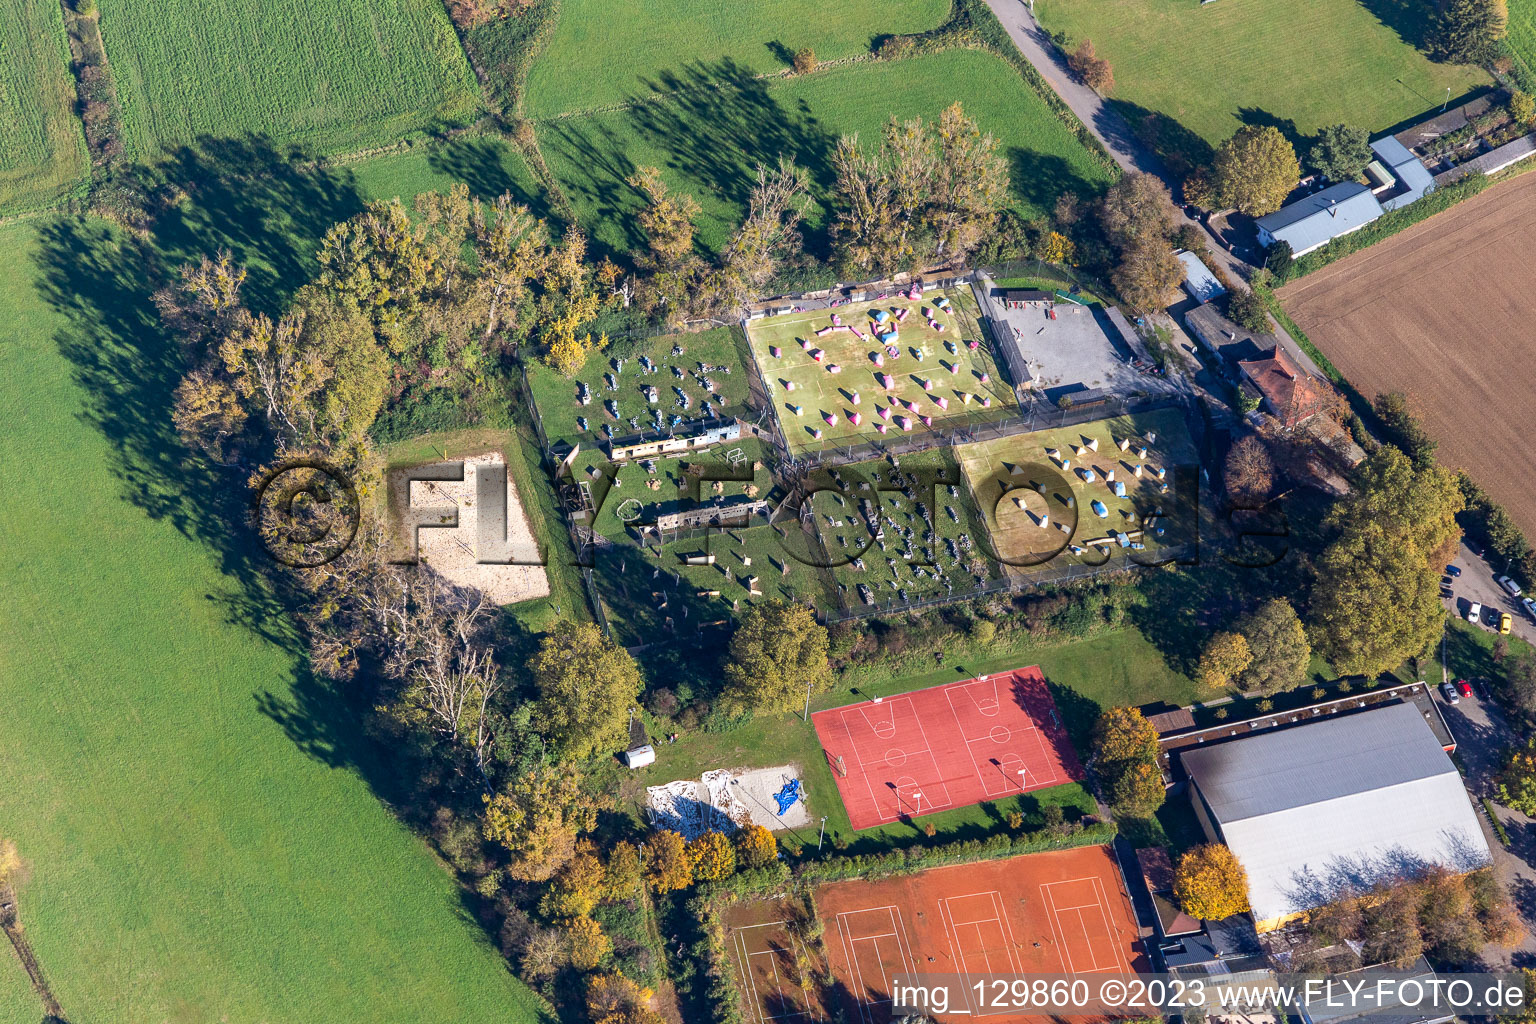 Aerial view of Dog sports club Durlach in the district Durlach in Karlsruhe in the state Baden-Wuerttemberg, Germany